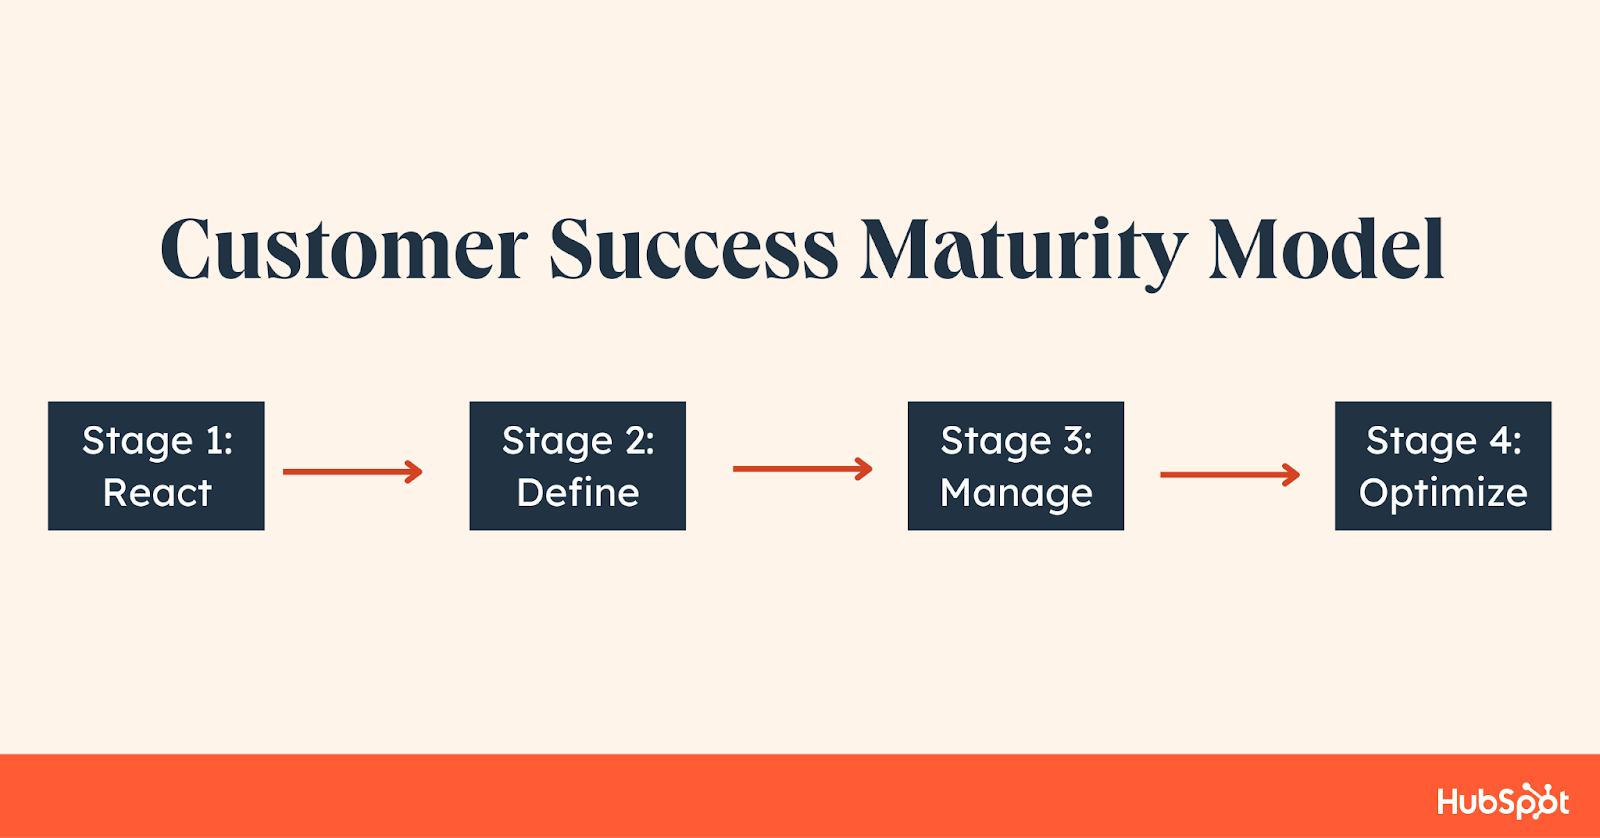 How Mature is Your Customer Success Team? Try This Customer Success Maturity Model